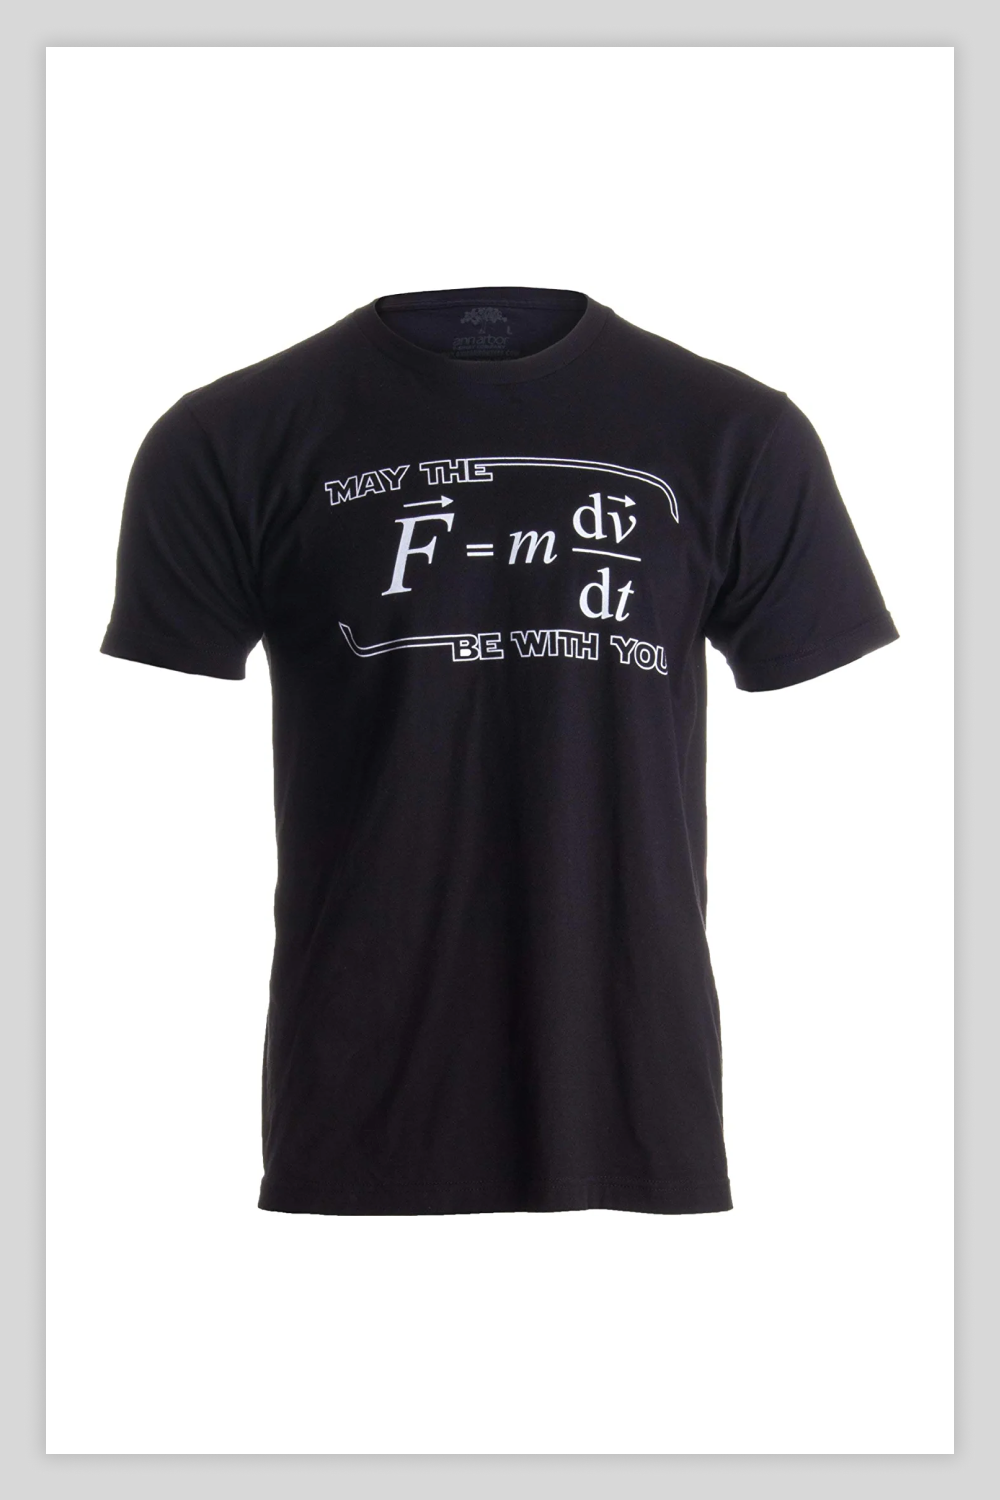 May The (F=m*dv/dt) Be with You | Funny Physics Science Unisex T-Shirt.